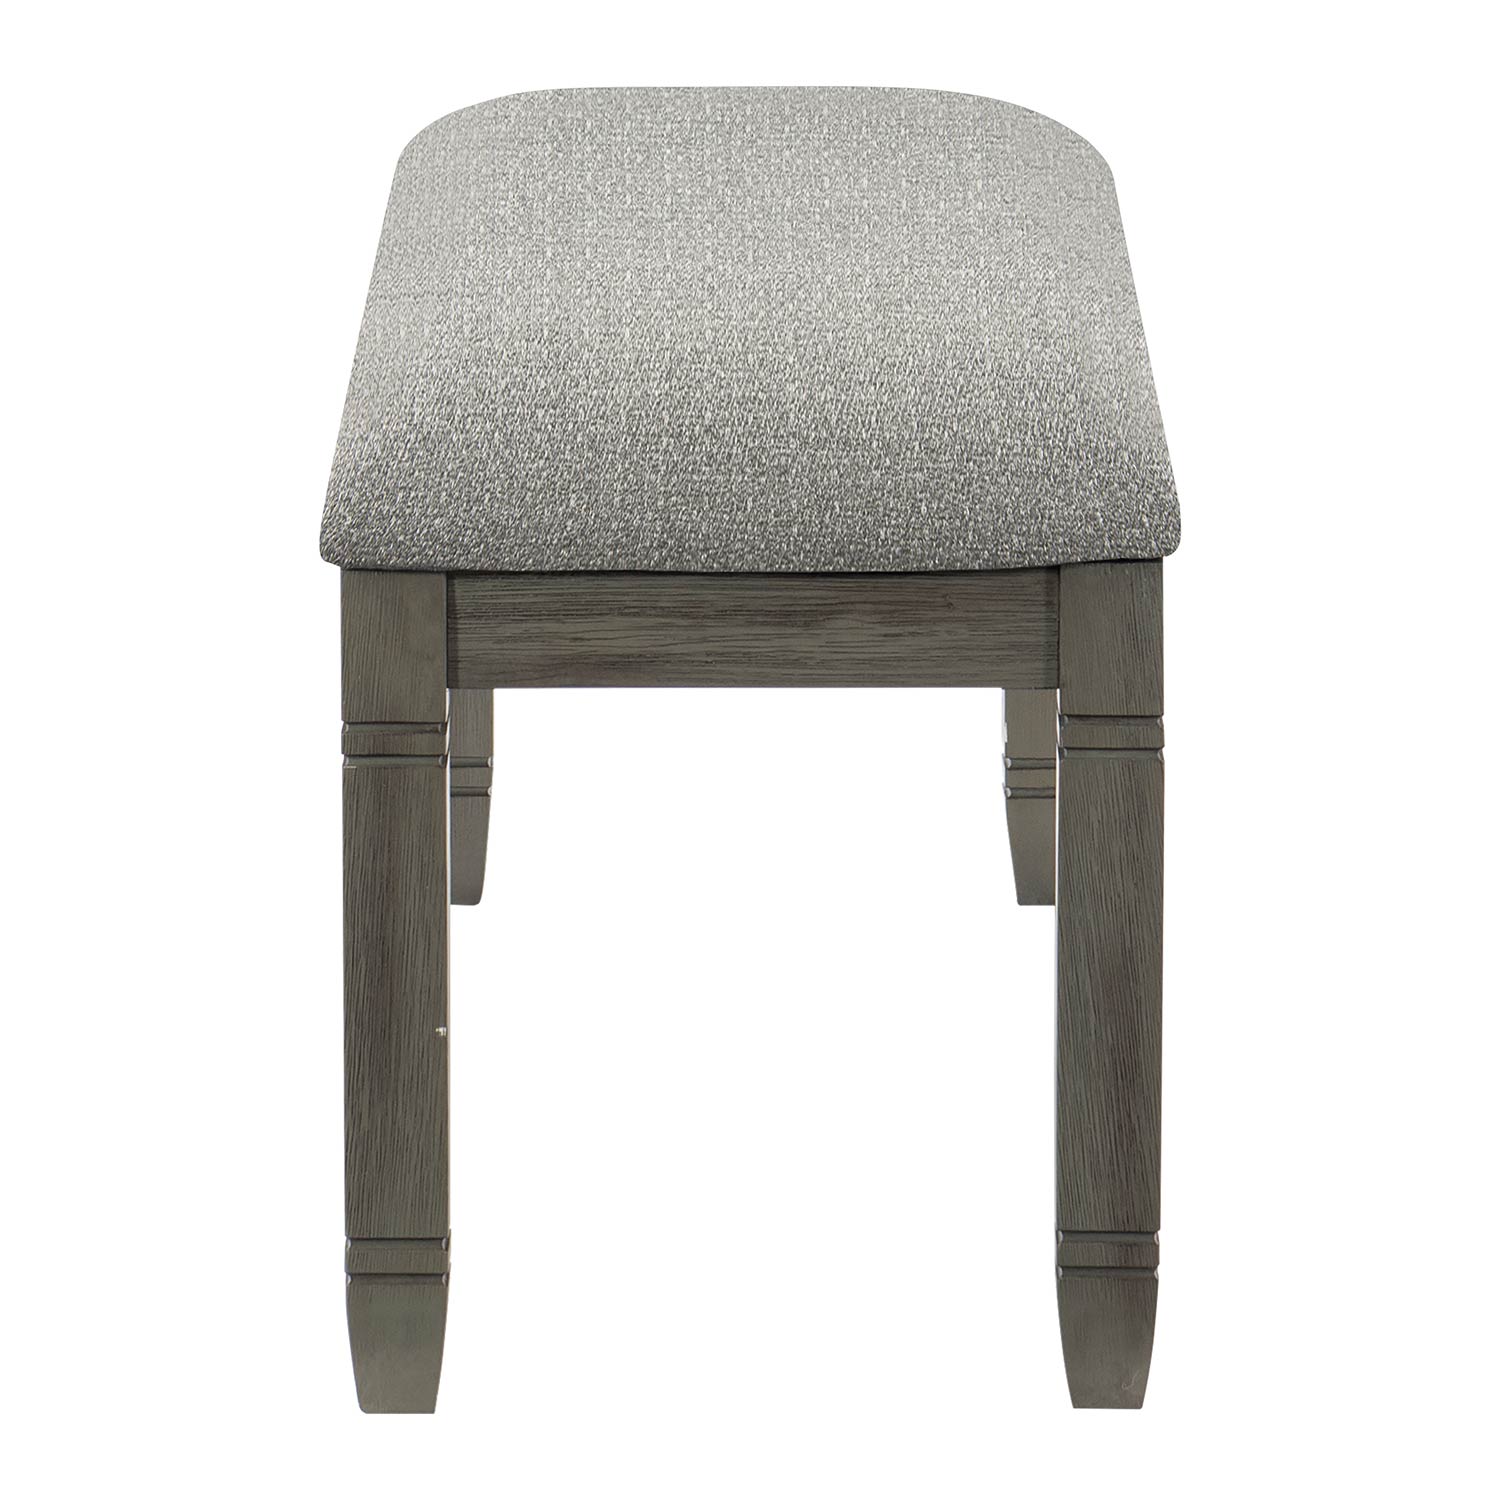 Homelegance Granby Bench - Antique Gray and Coffee